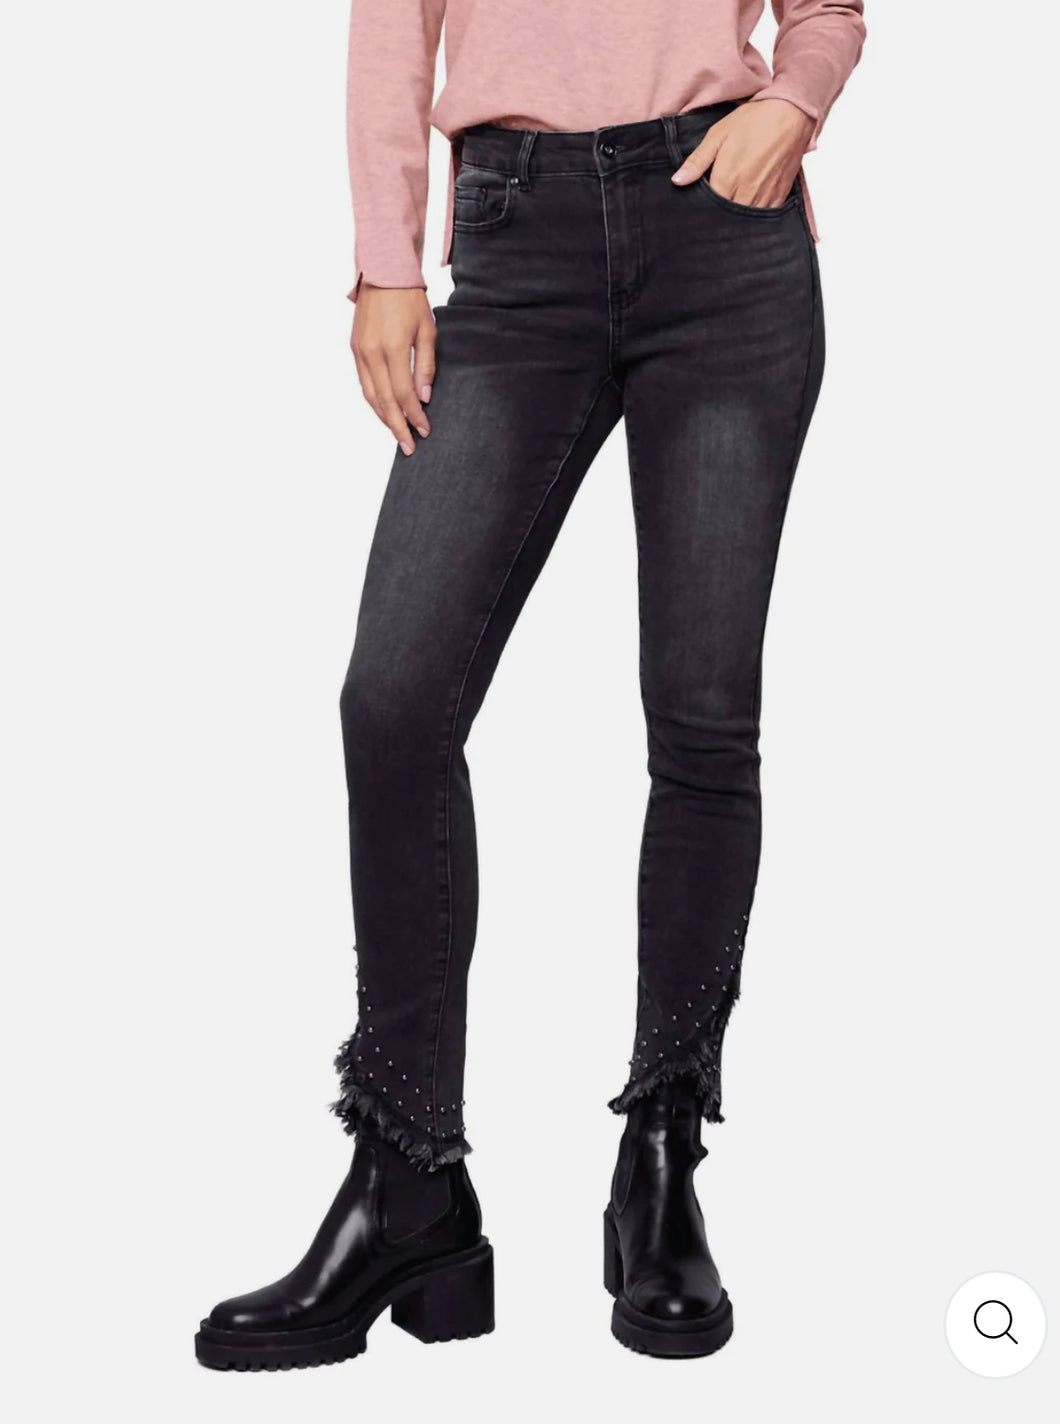 Charcoal studded jeans